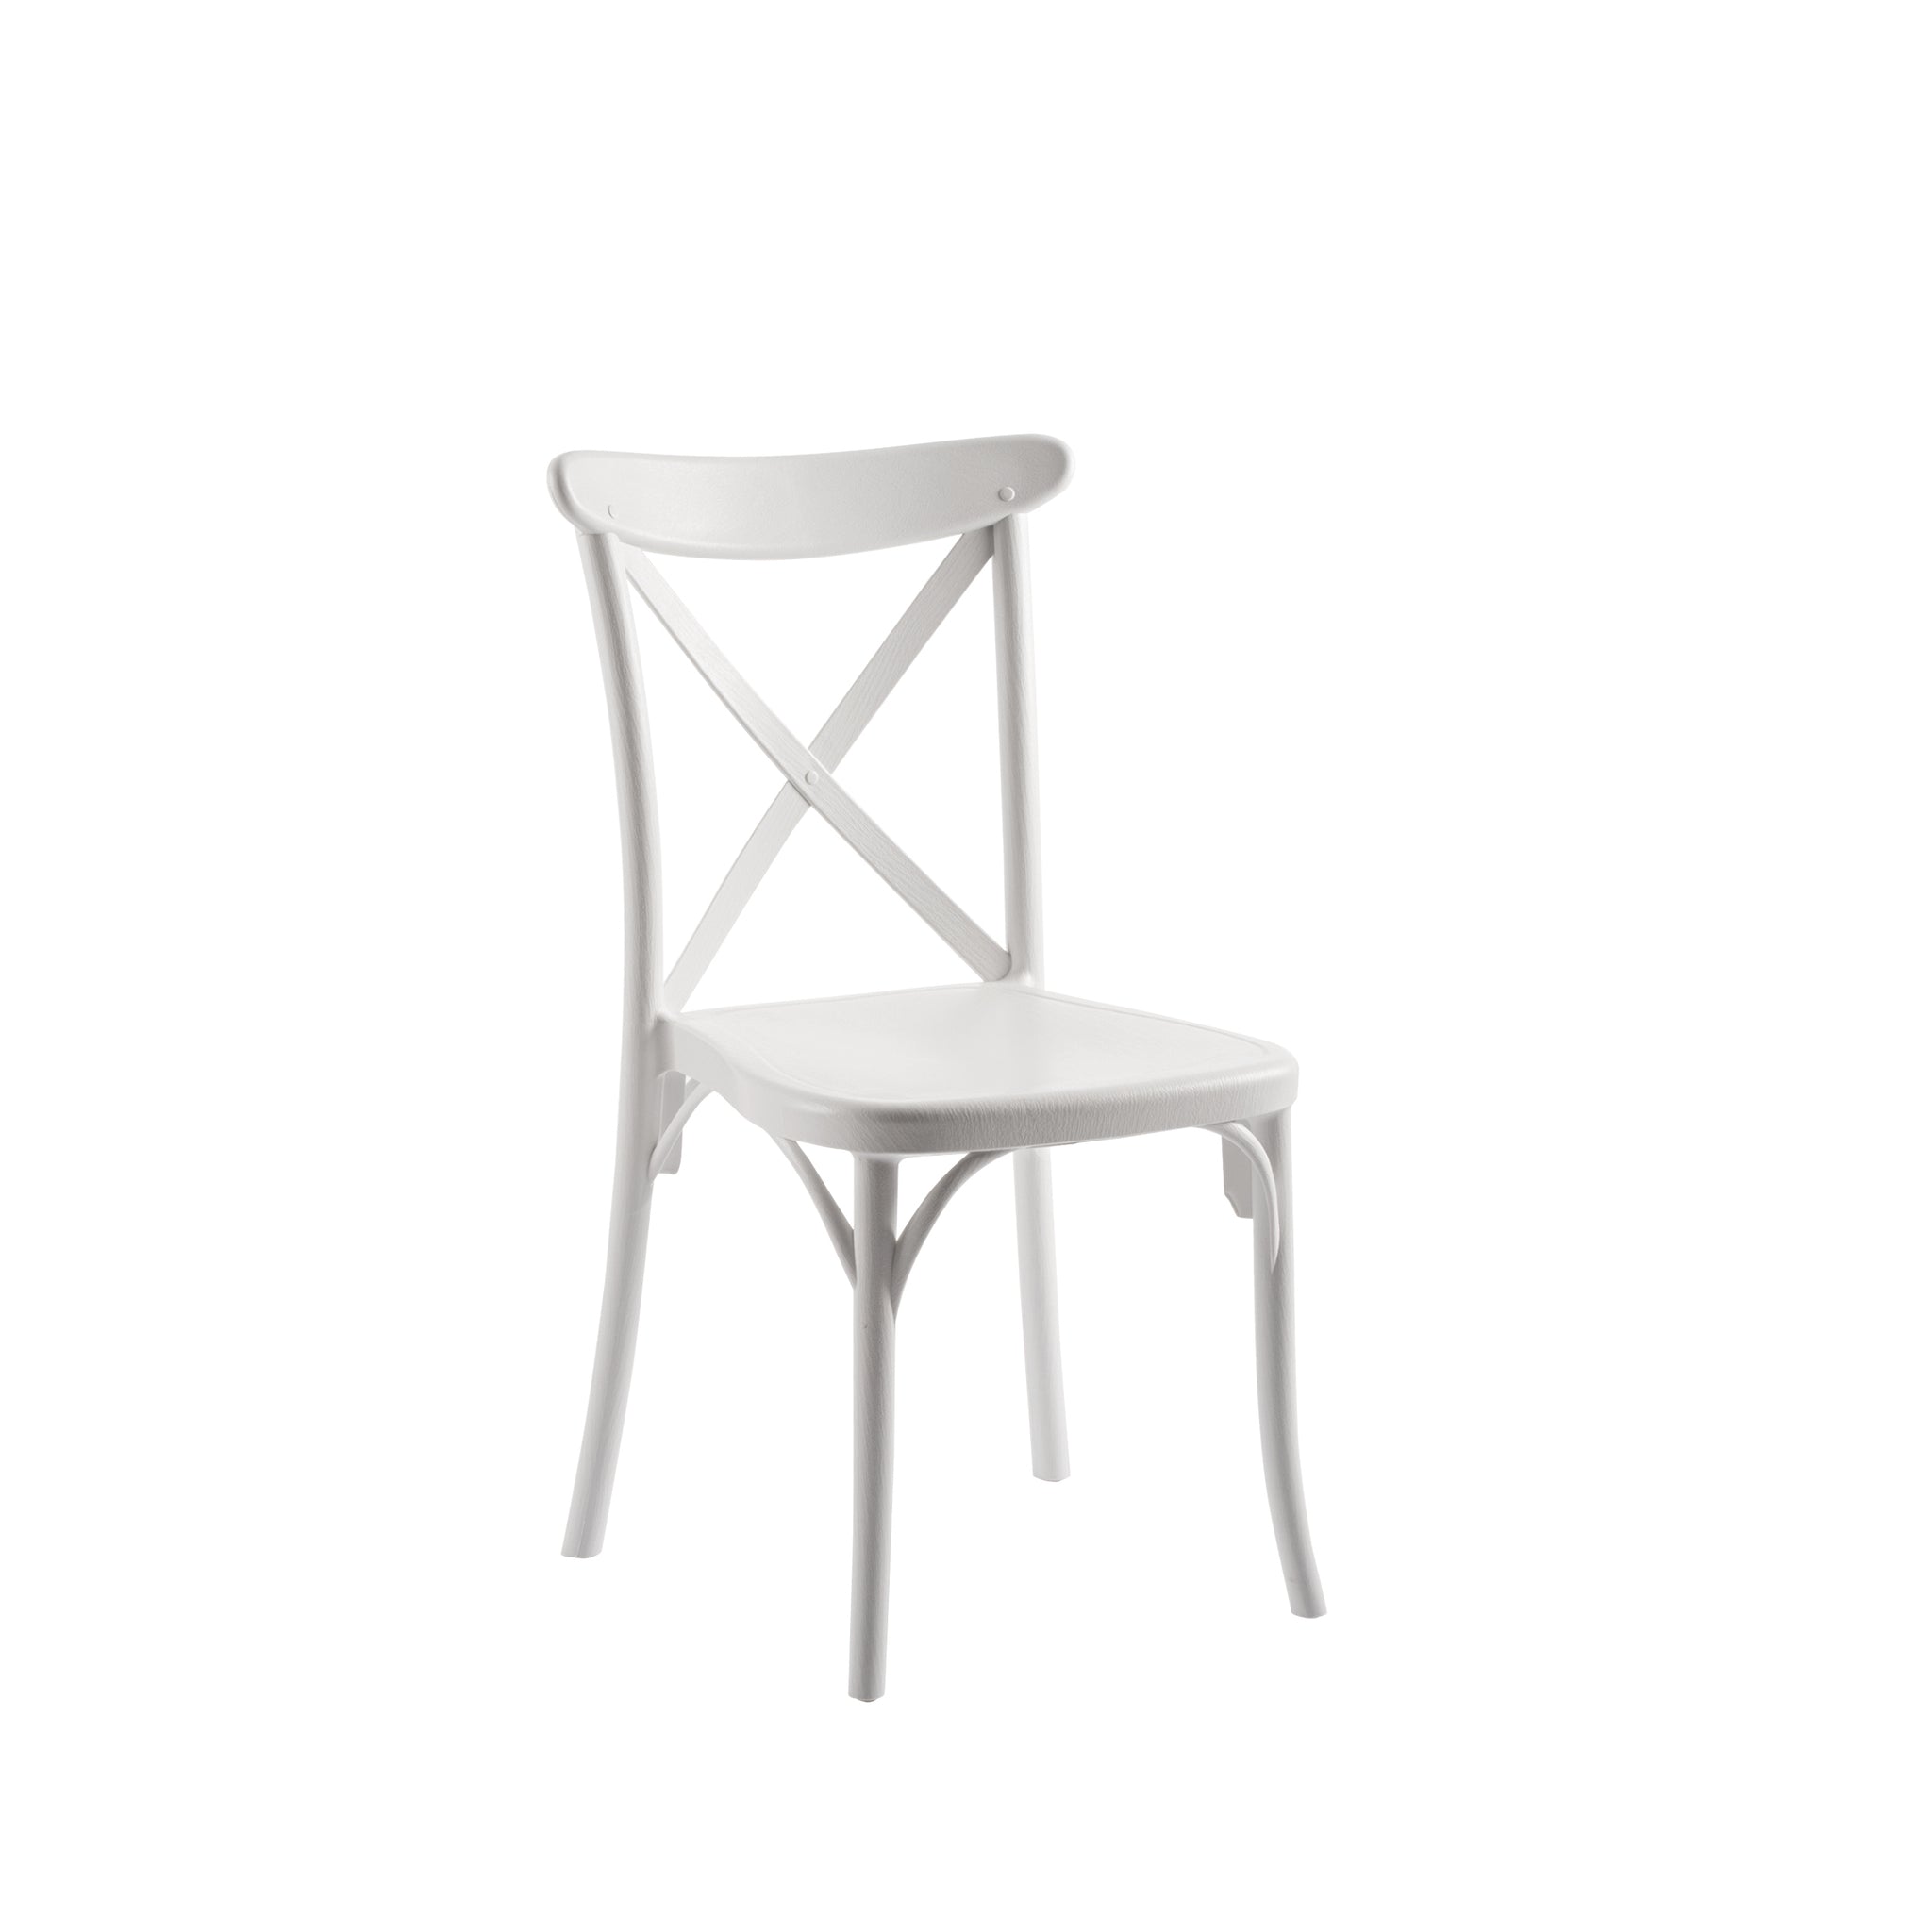 Hedcor Soul Chair